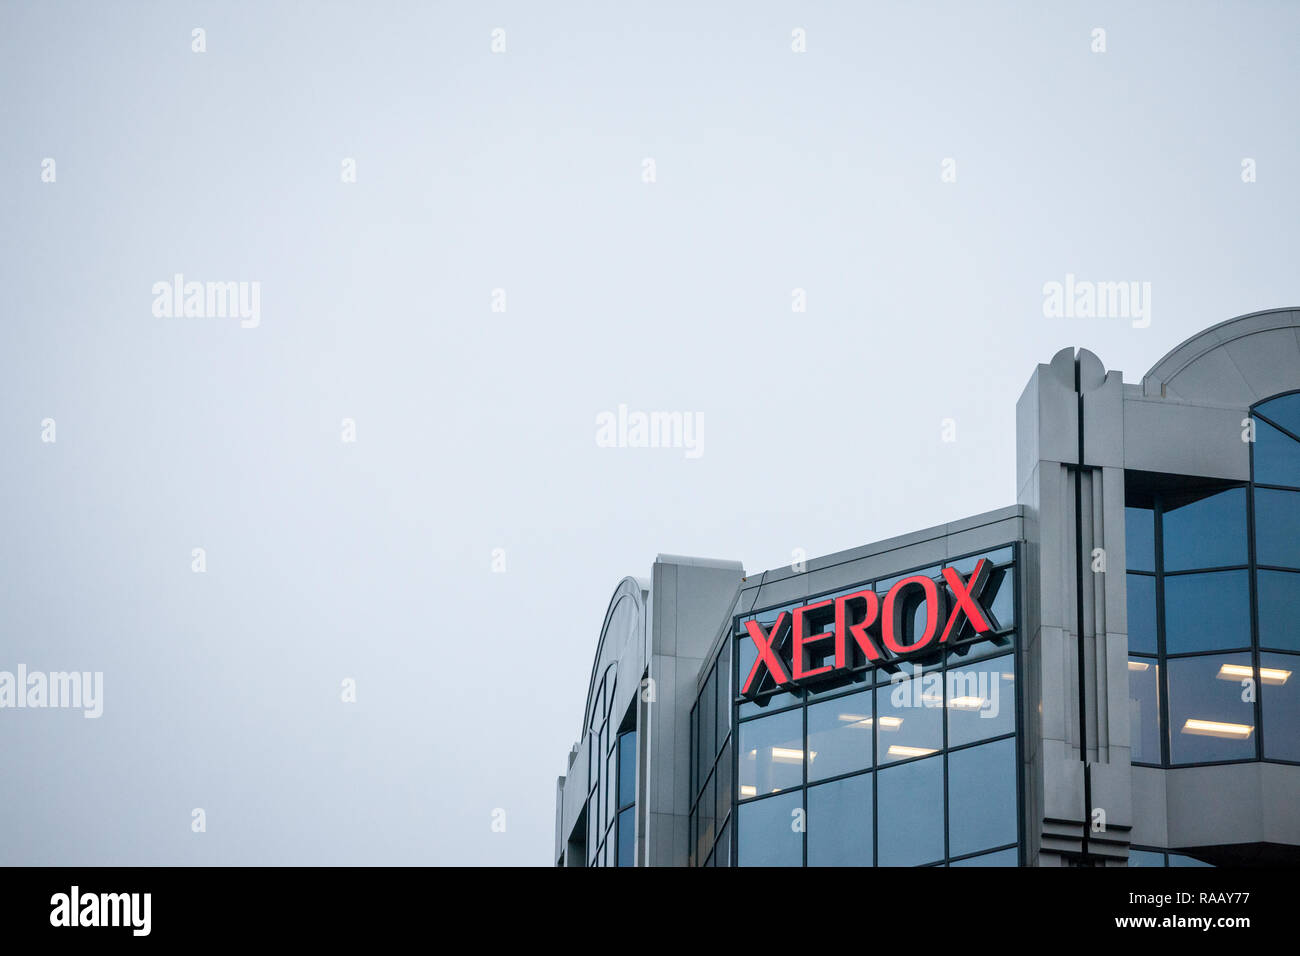 MONTREAL, CANADA - NOVEMBER 6, 2018: Xerox Corporation logo in front of their main office for Montreal, Quebec. Xerox is a multinational corporation s Stock Photo